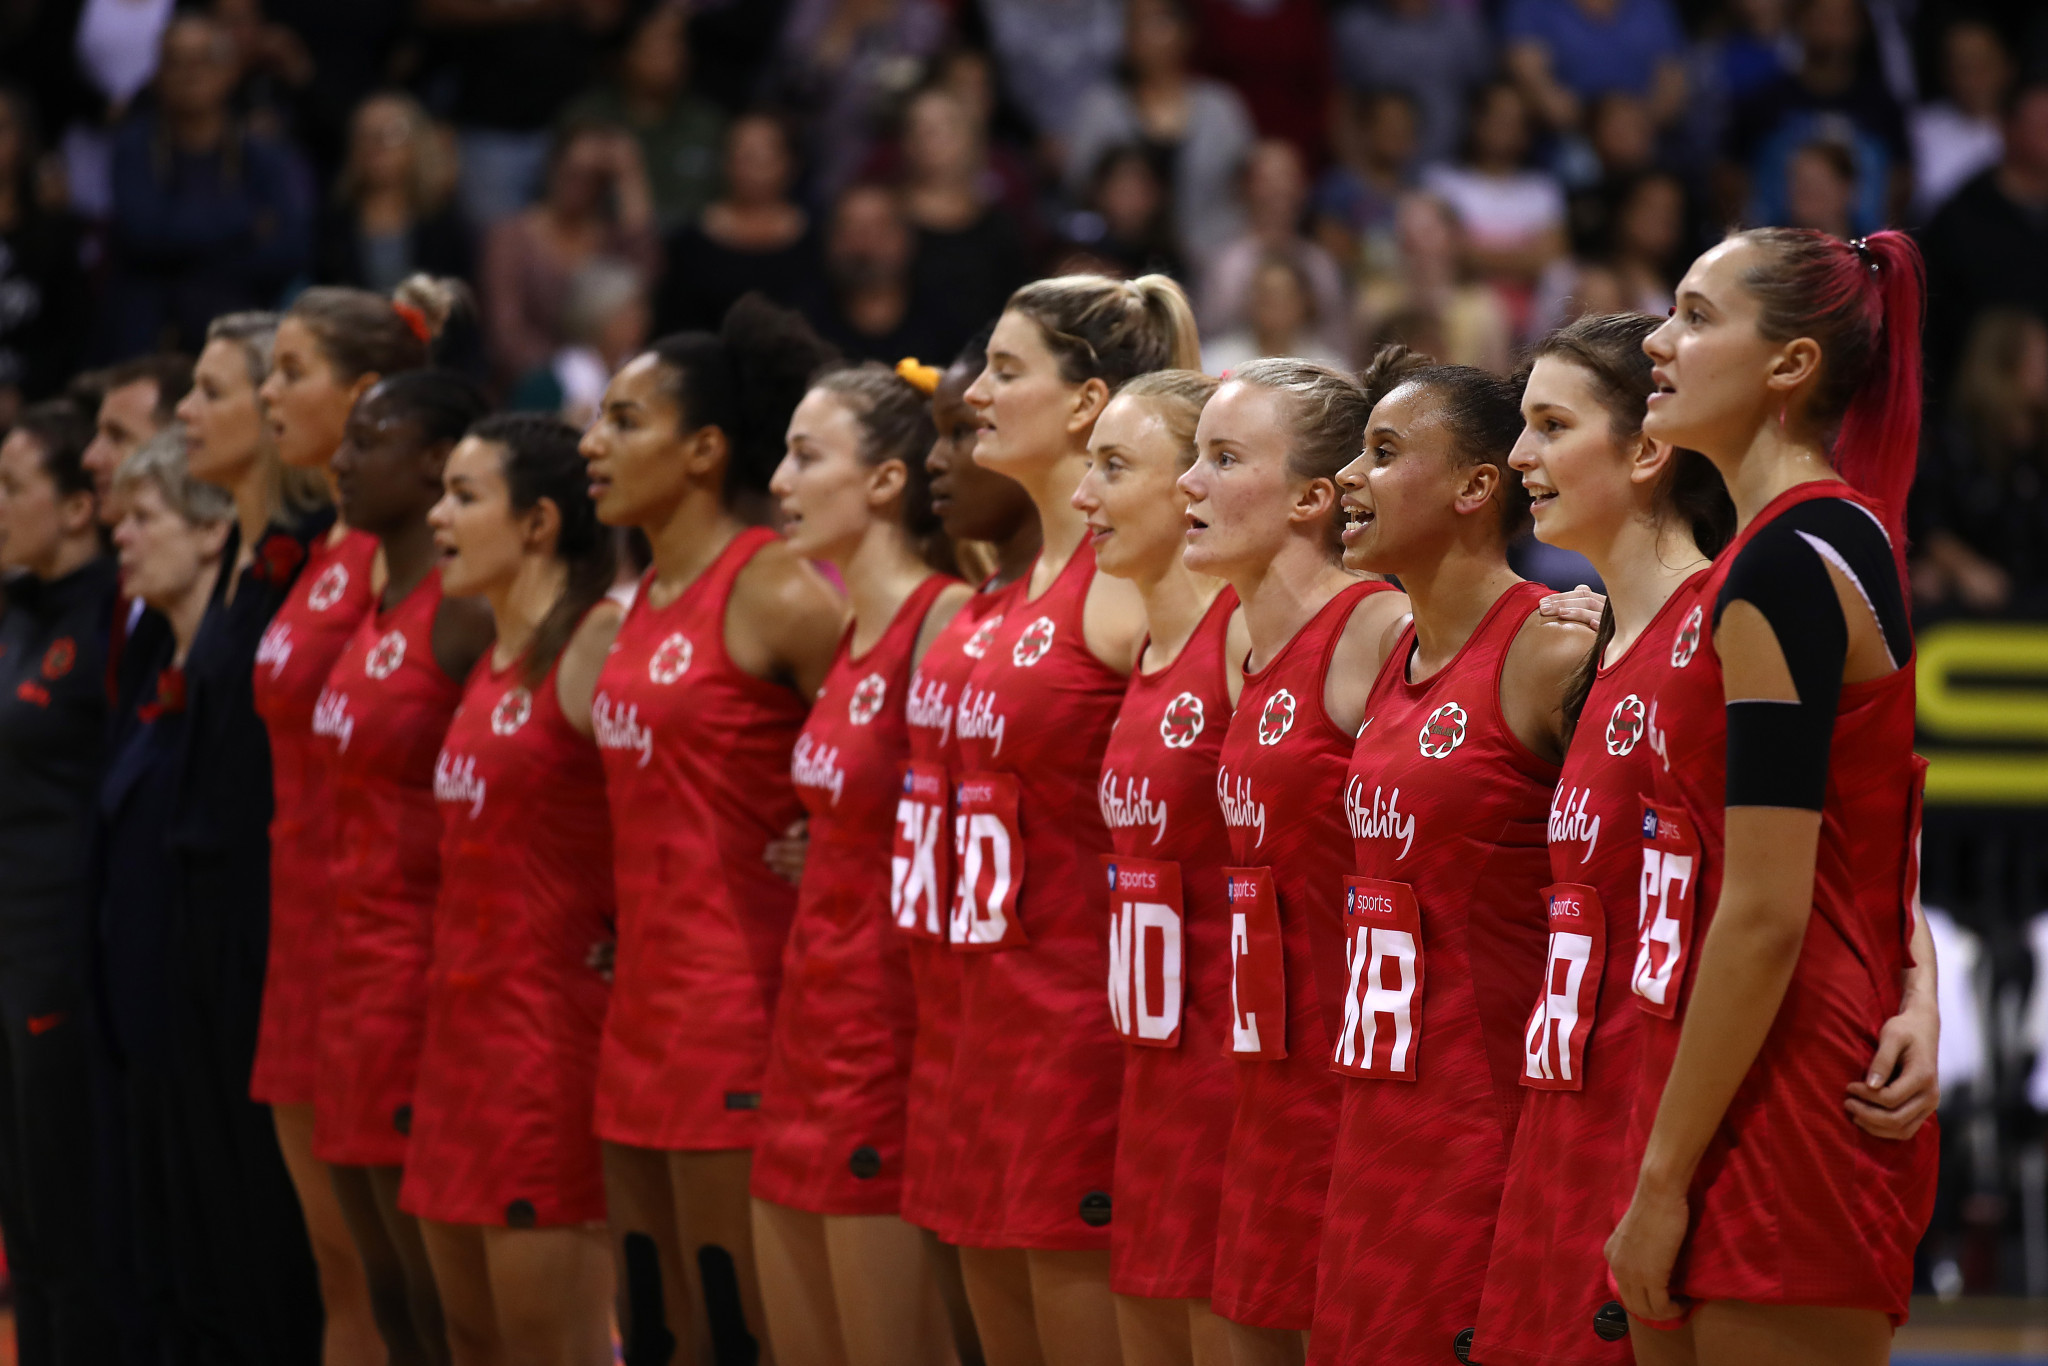 England Netball adds Thomas to Board to offer inclusion and diversity